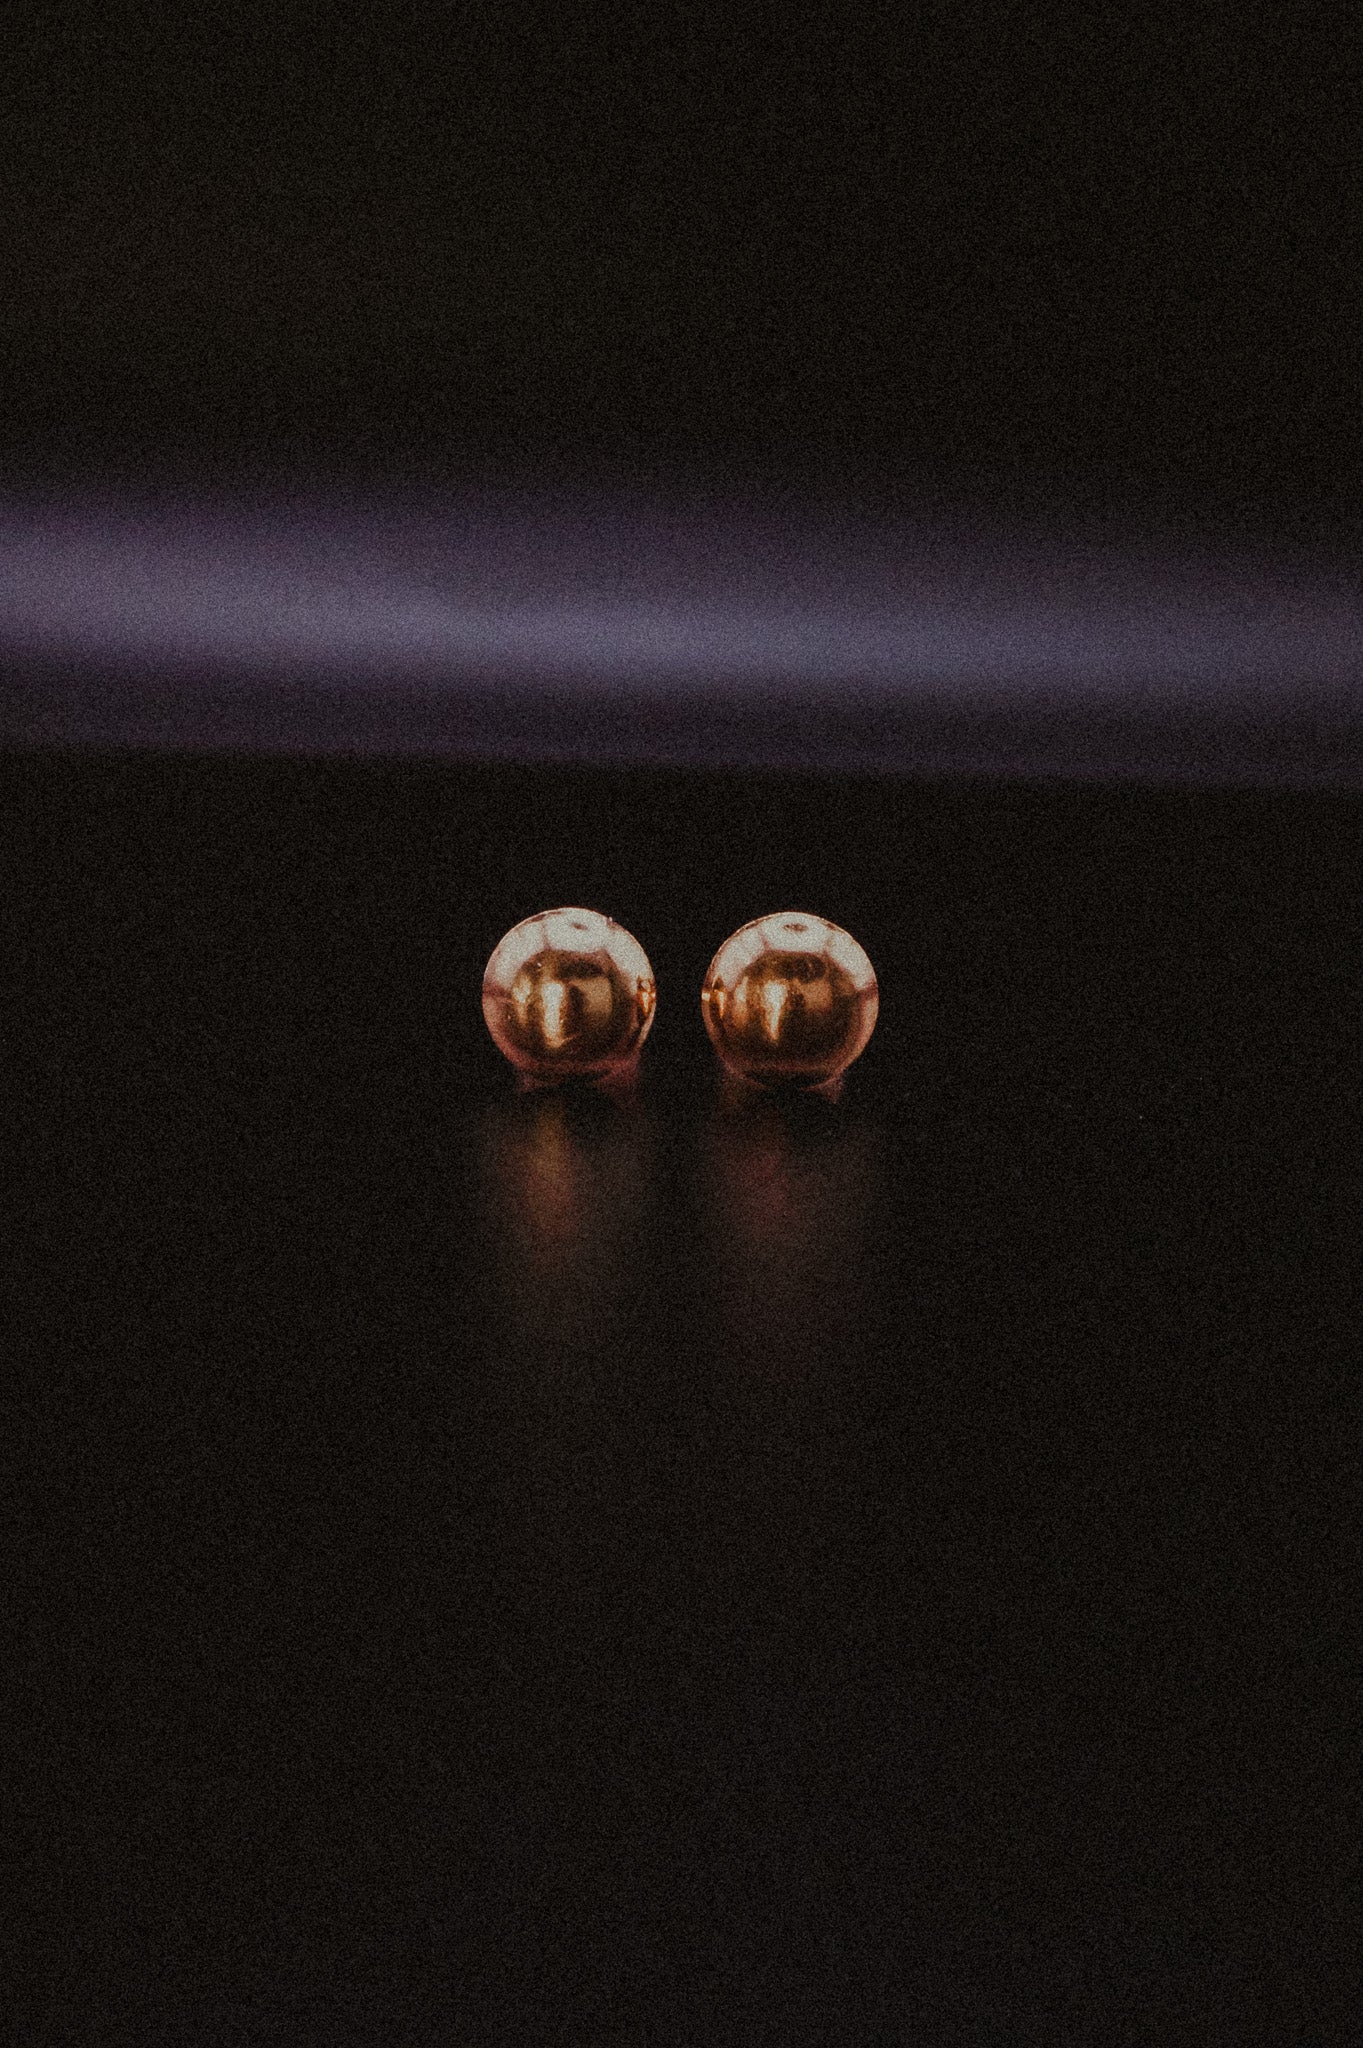 Dome Stud Earrings, Gold Fill, Rose Gold Fill or Sterling Silver